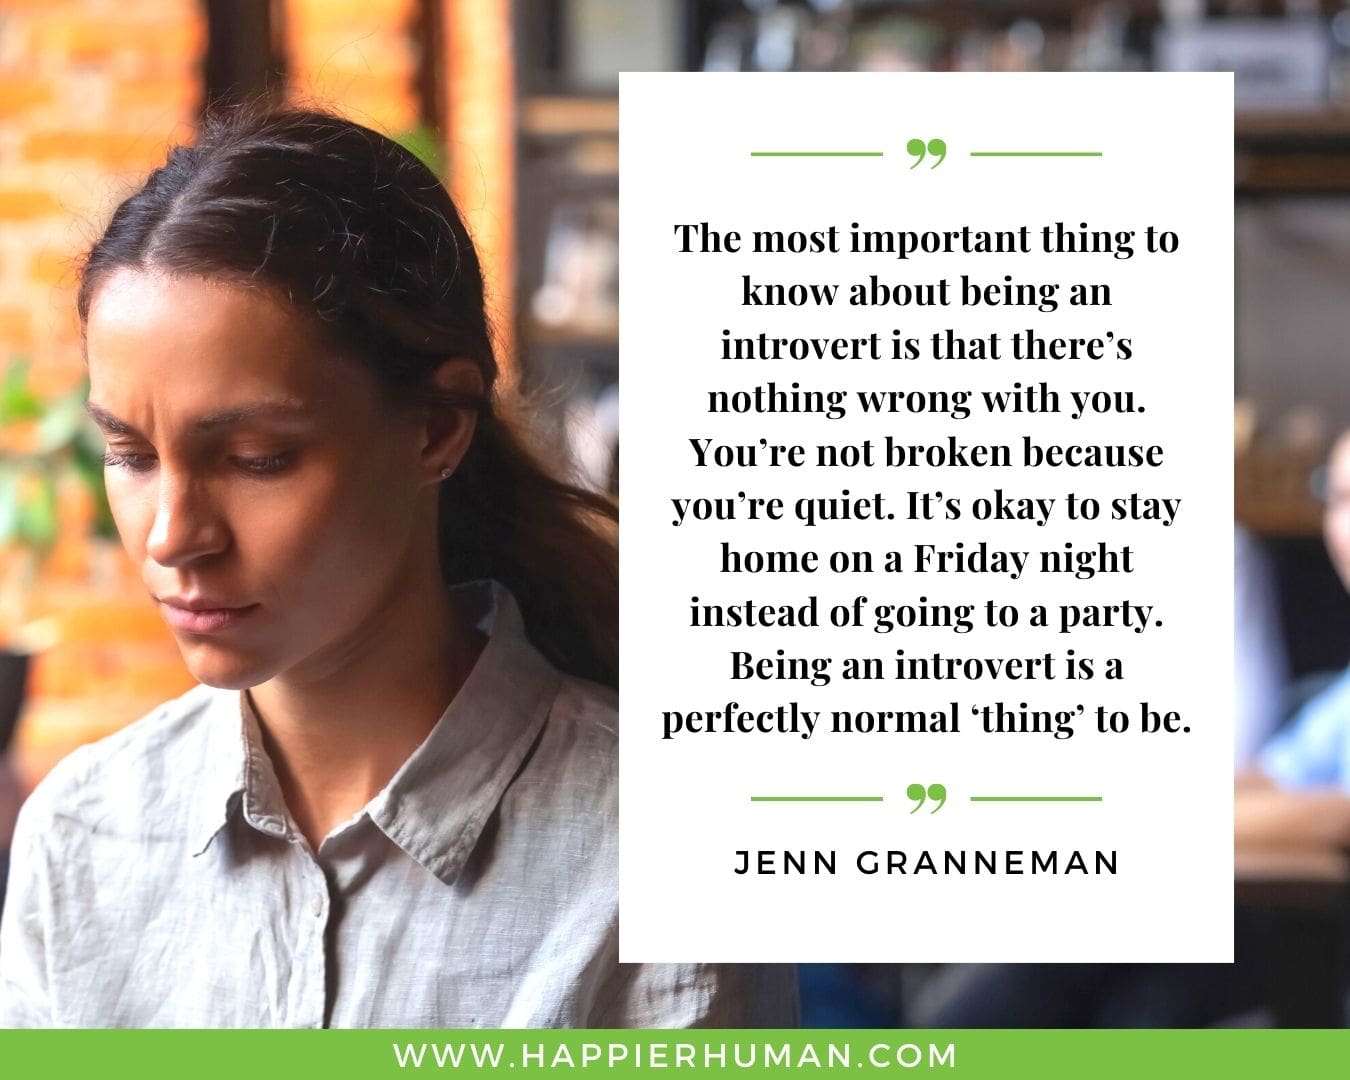 Introvert Quotes - “The most important thing to know about being an introvert is that there’s nothing wrong with you. You’re not broken because you’re quiet. It’s okay to stay home on a Friday night instead of going to a party. Being an introvert is a perfectly normal ‘thing’ to be.” – Jenn Granneman